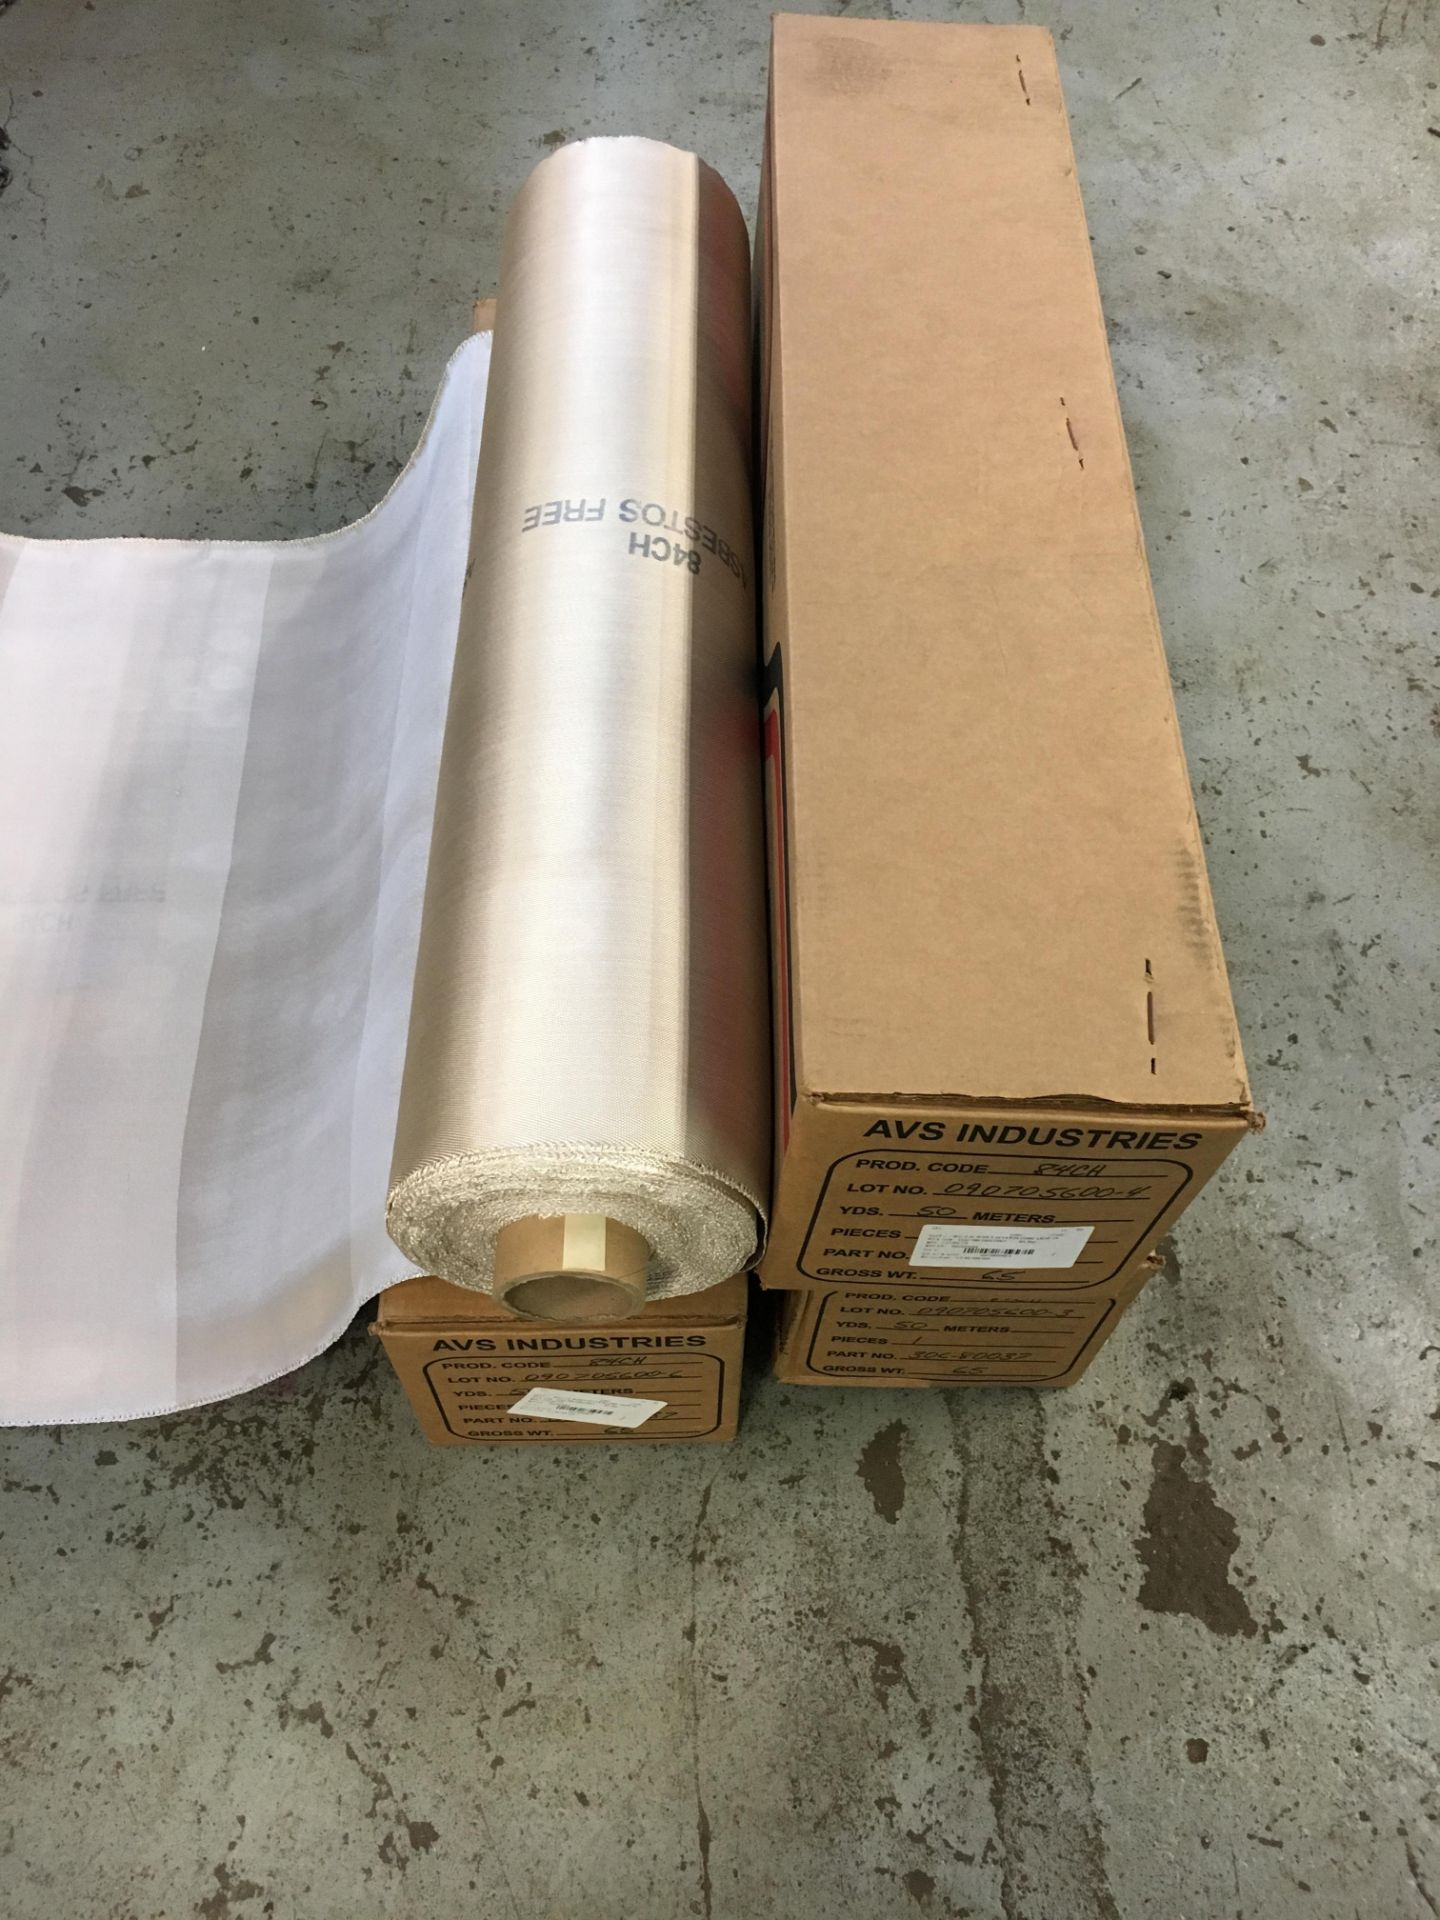 LOT OF 4 AVS INDUSTRIES HIGH TEMPERATURE WELDING BLANKET 306-80037 84CH 50 YARDS - Image 2 of 3